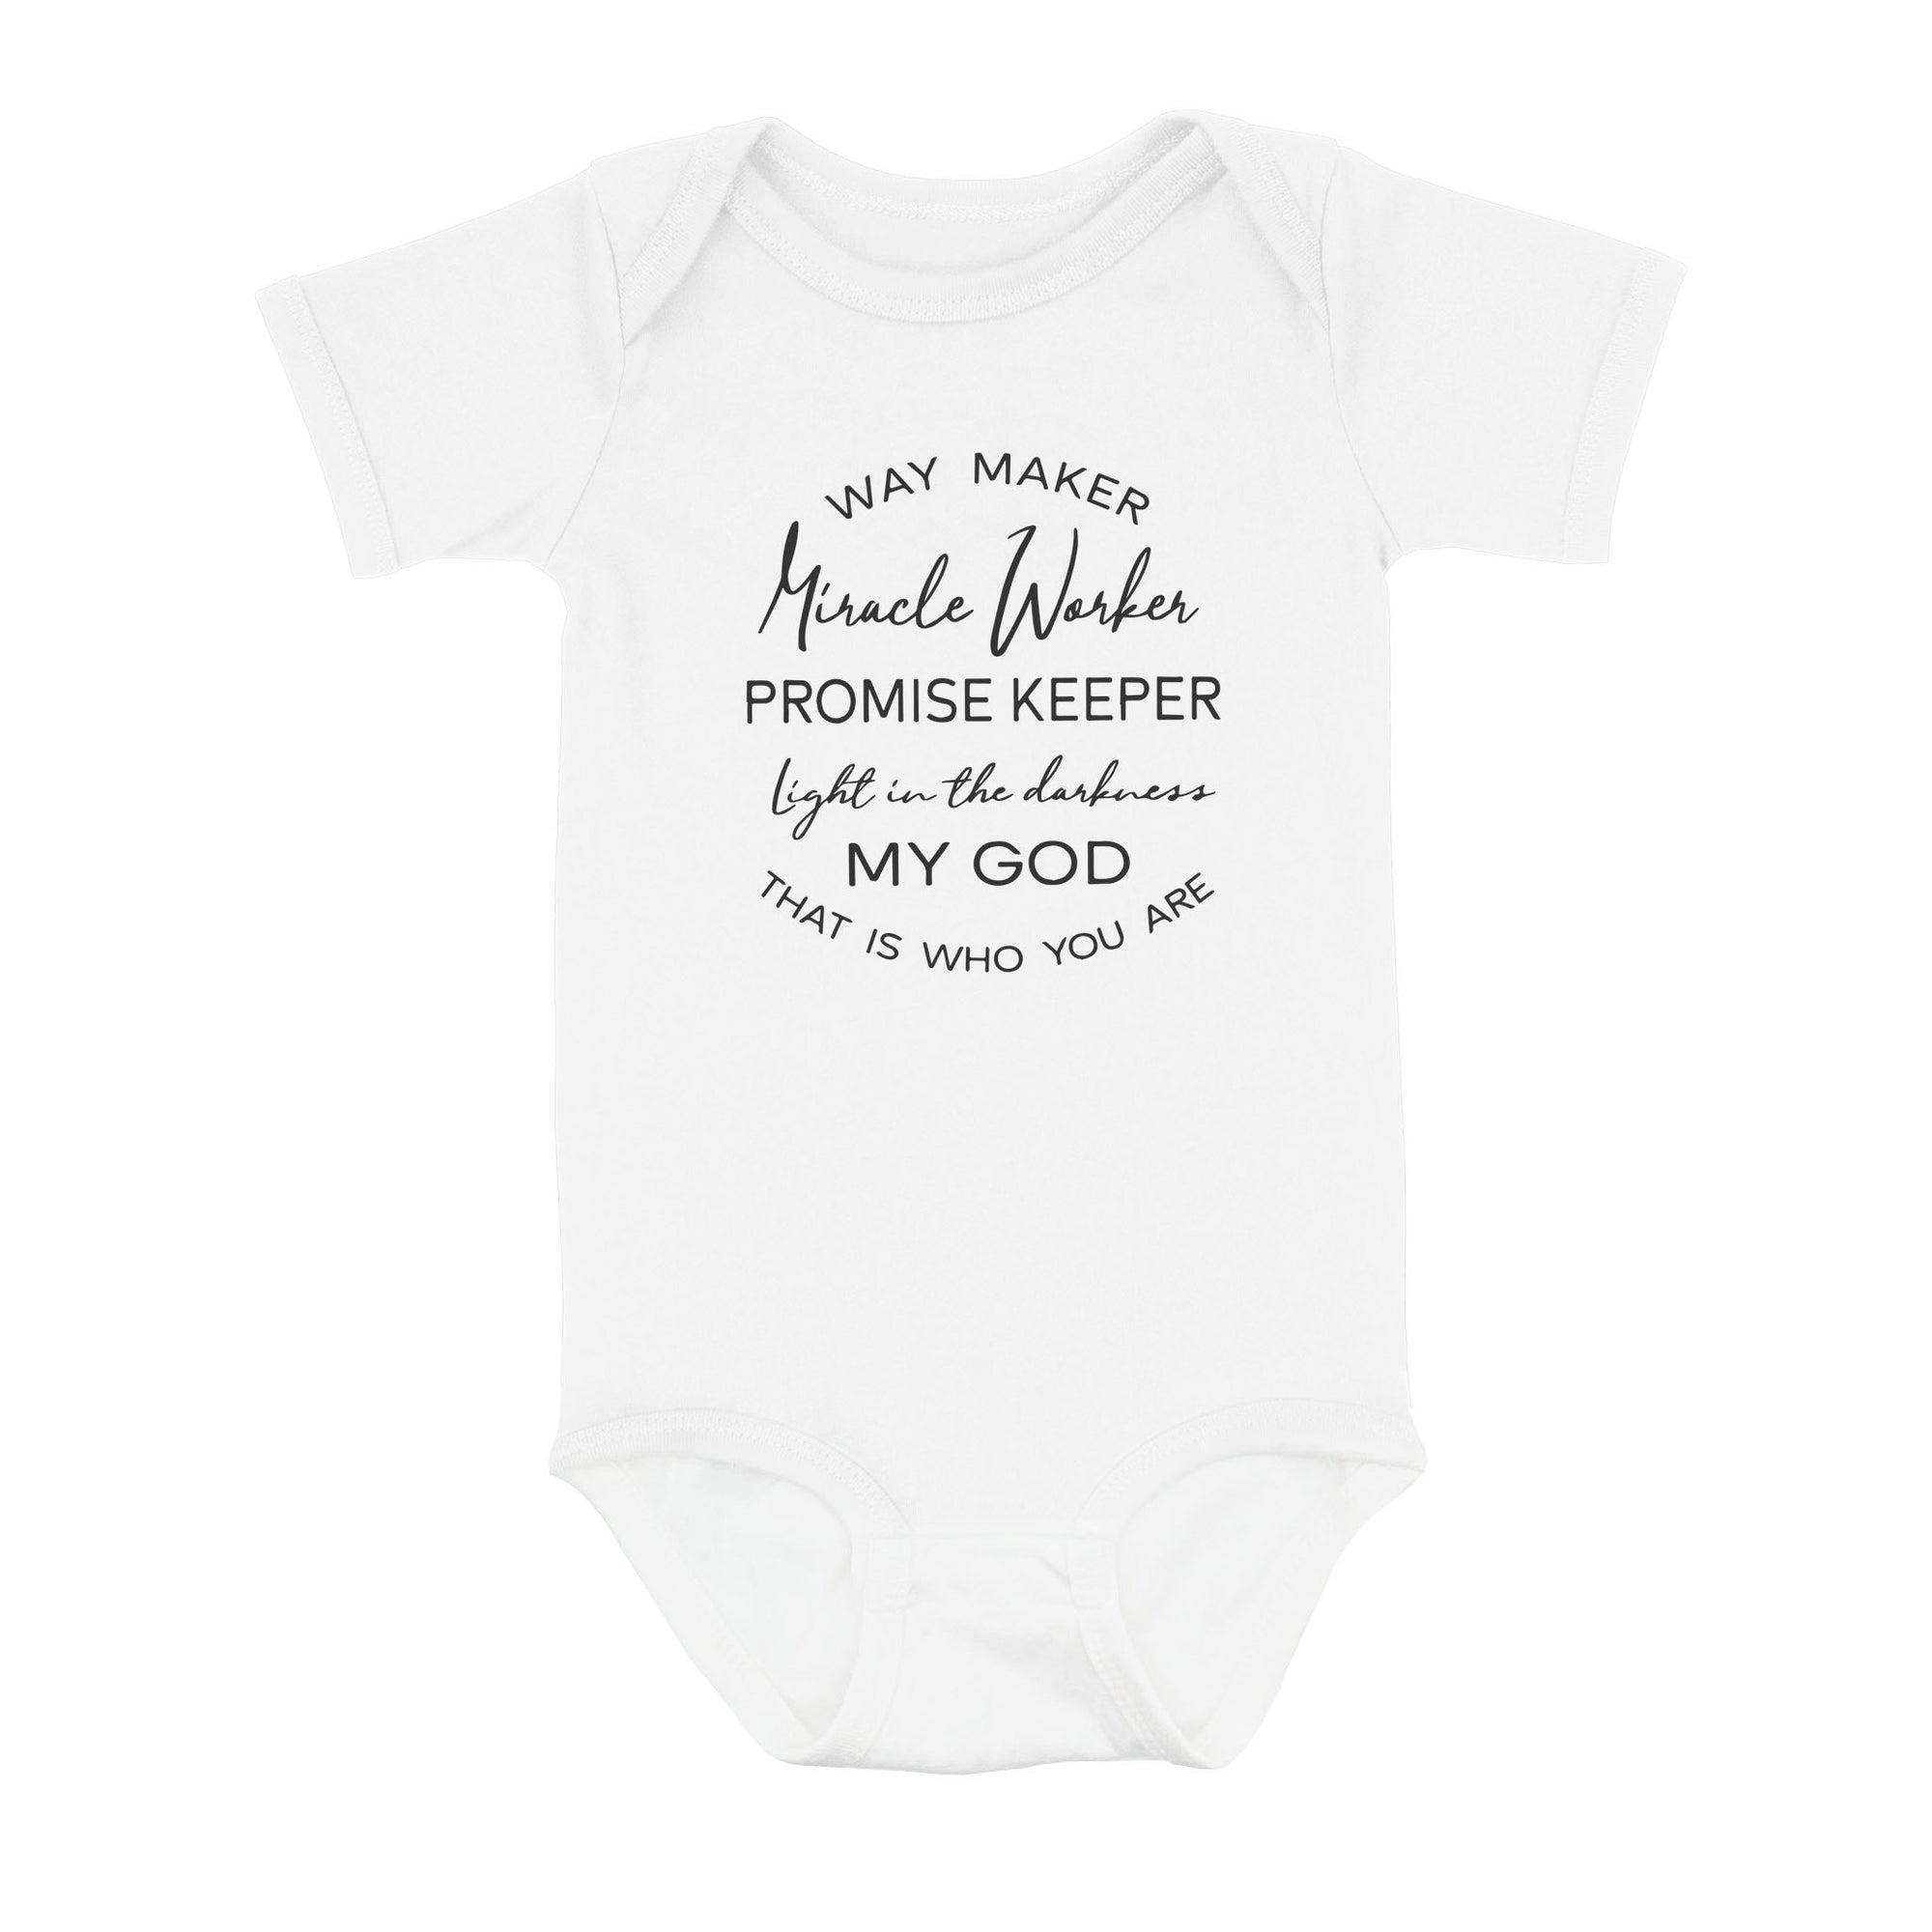 Way Maker Miracle Worker Promise Keeper My God, Spiritual, Christian, Religious, Gift for Friend, Way Maker Baby Onesie